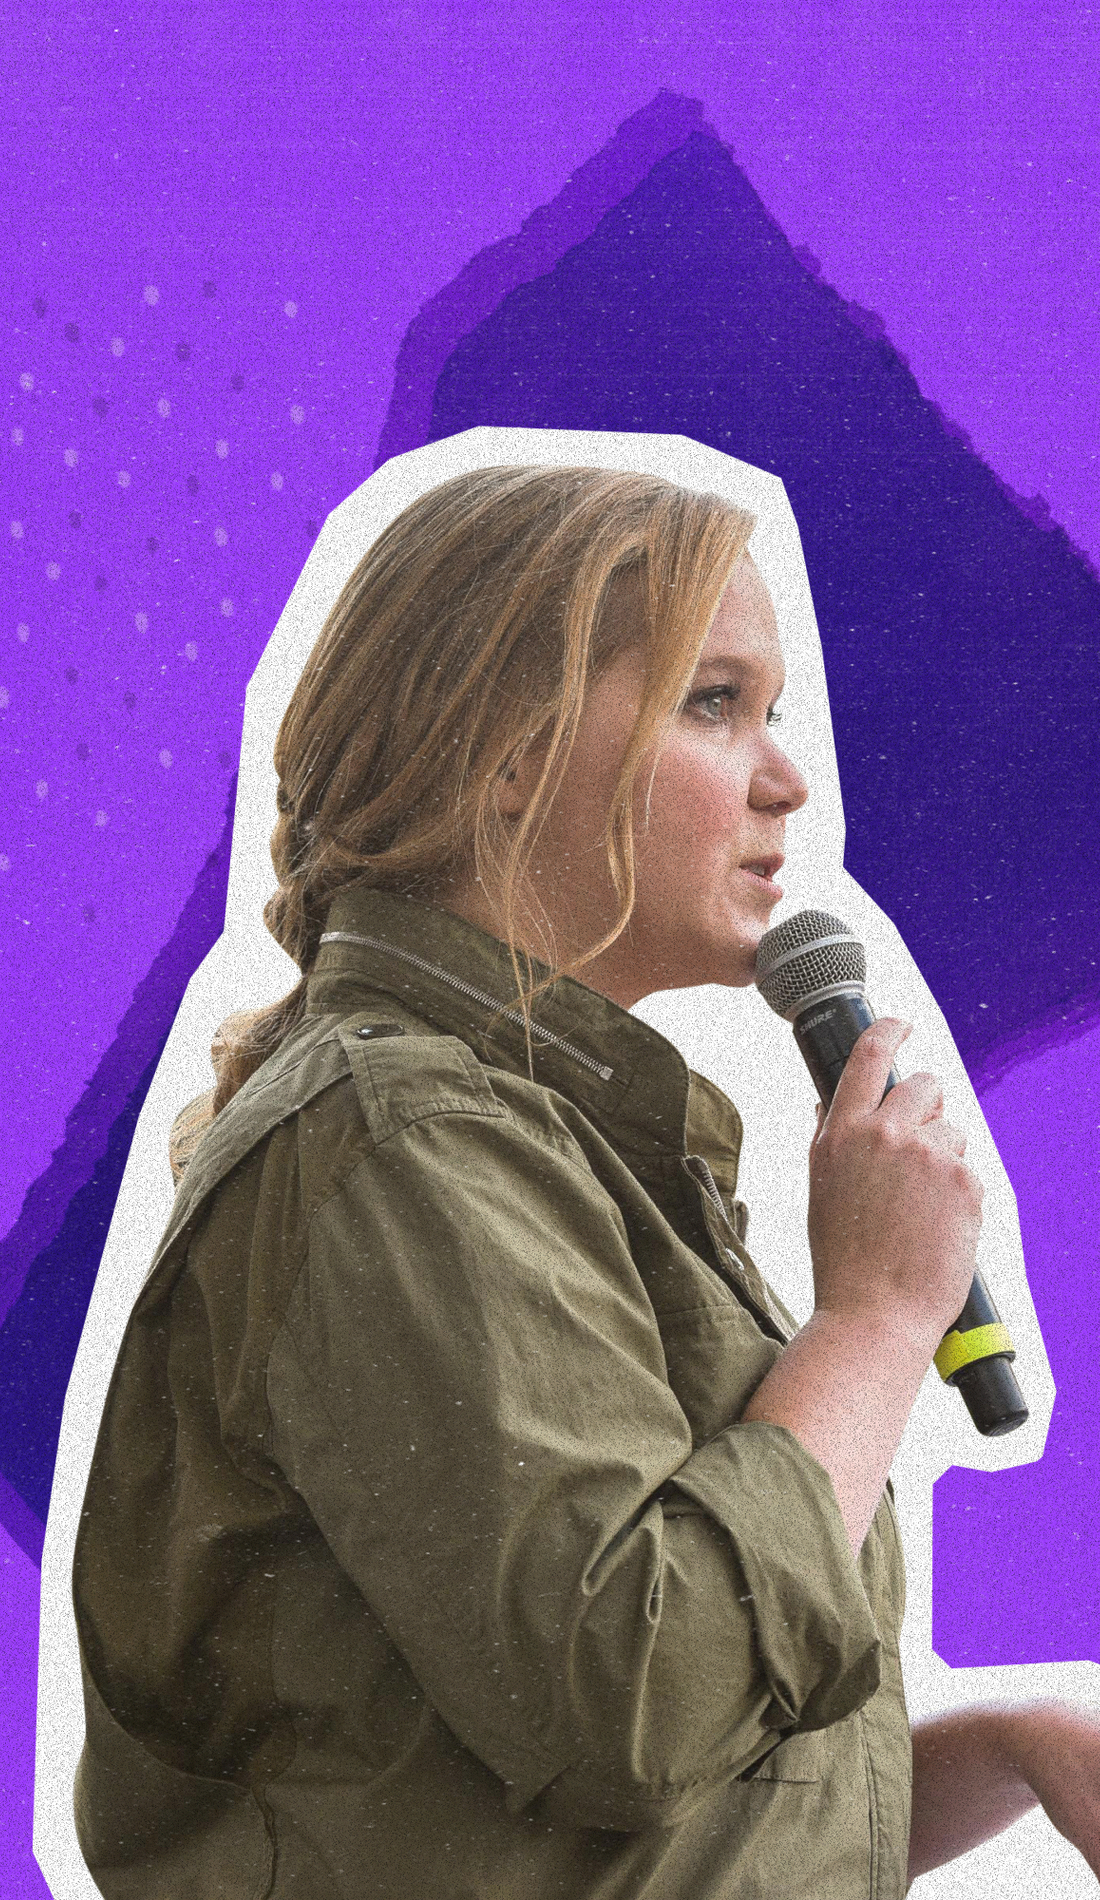 A Amy Schumer live event